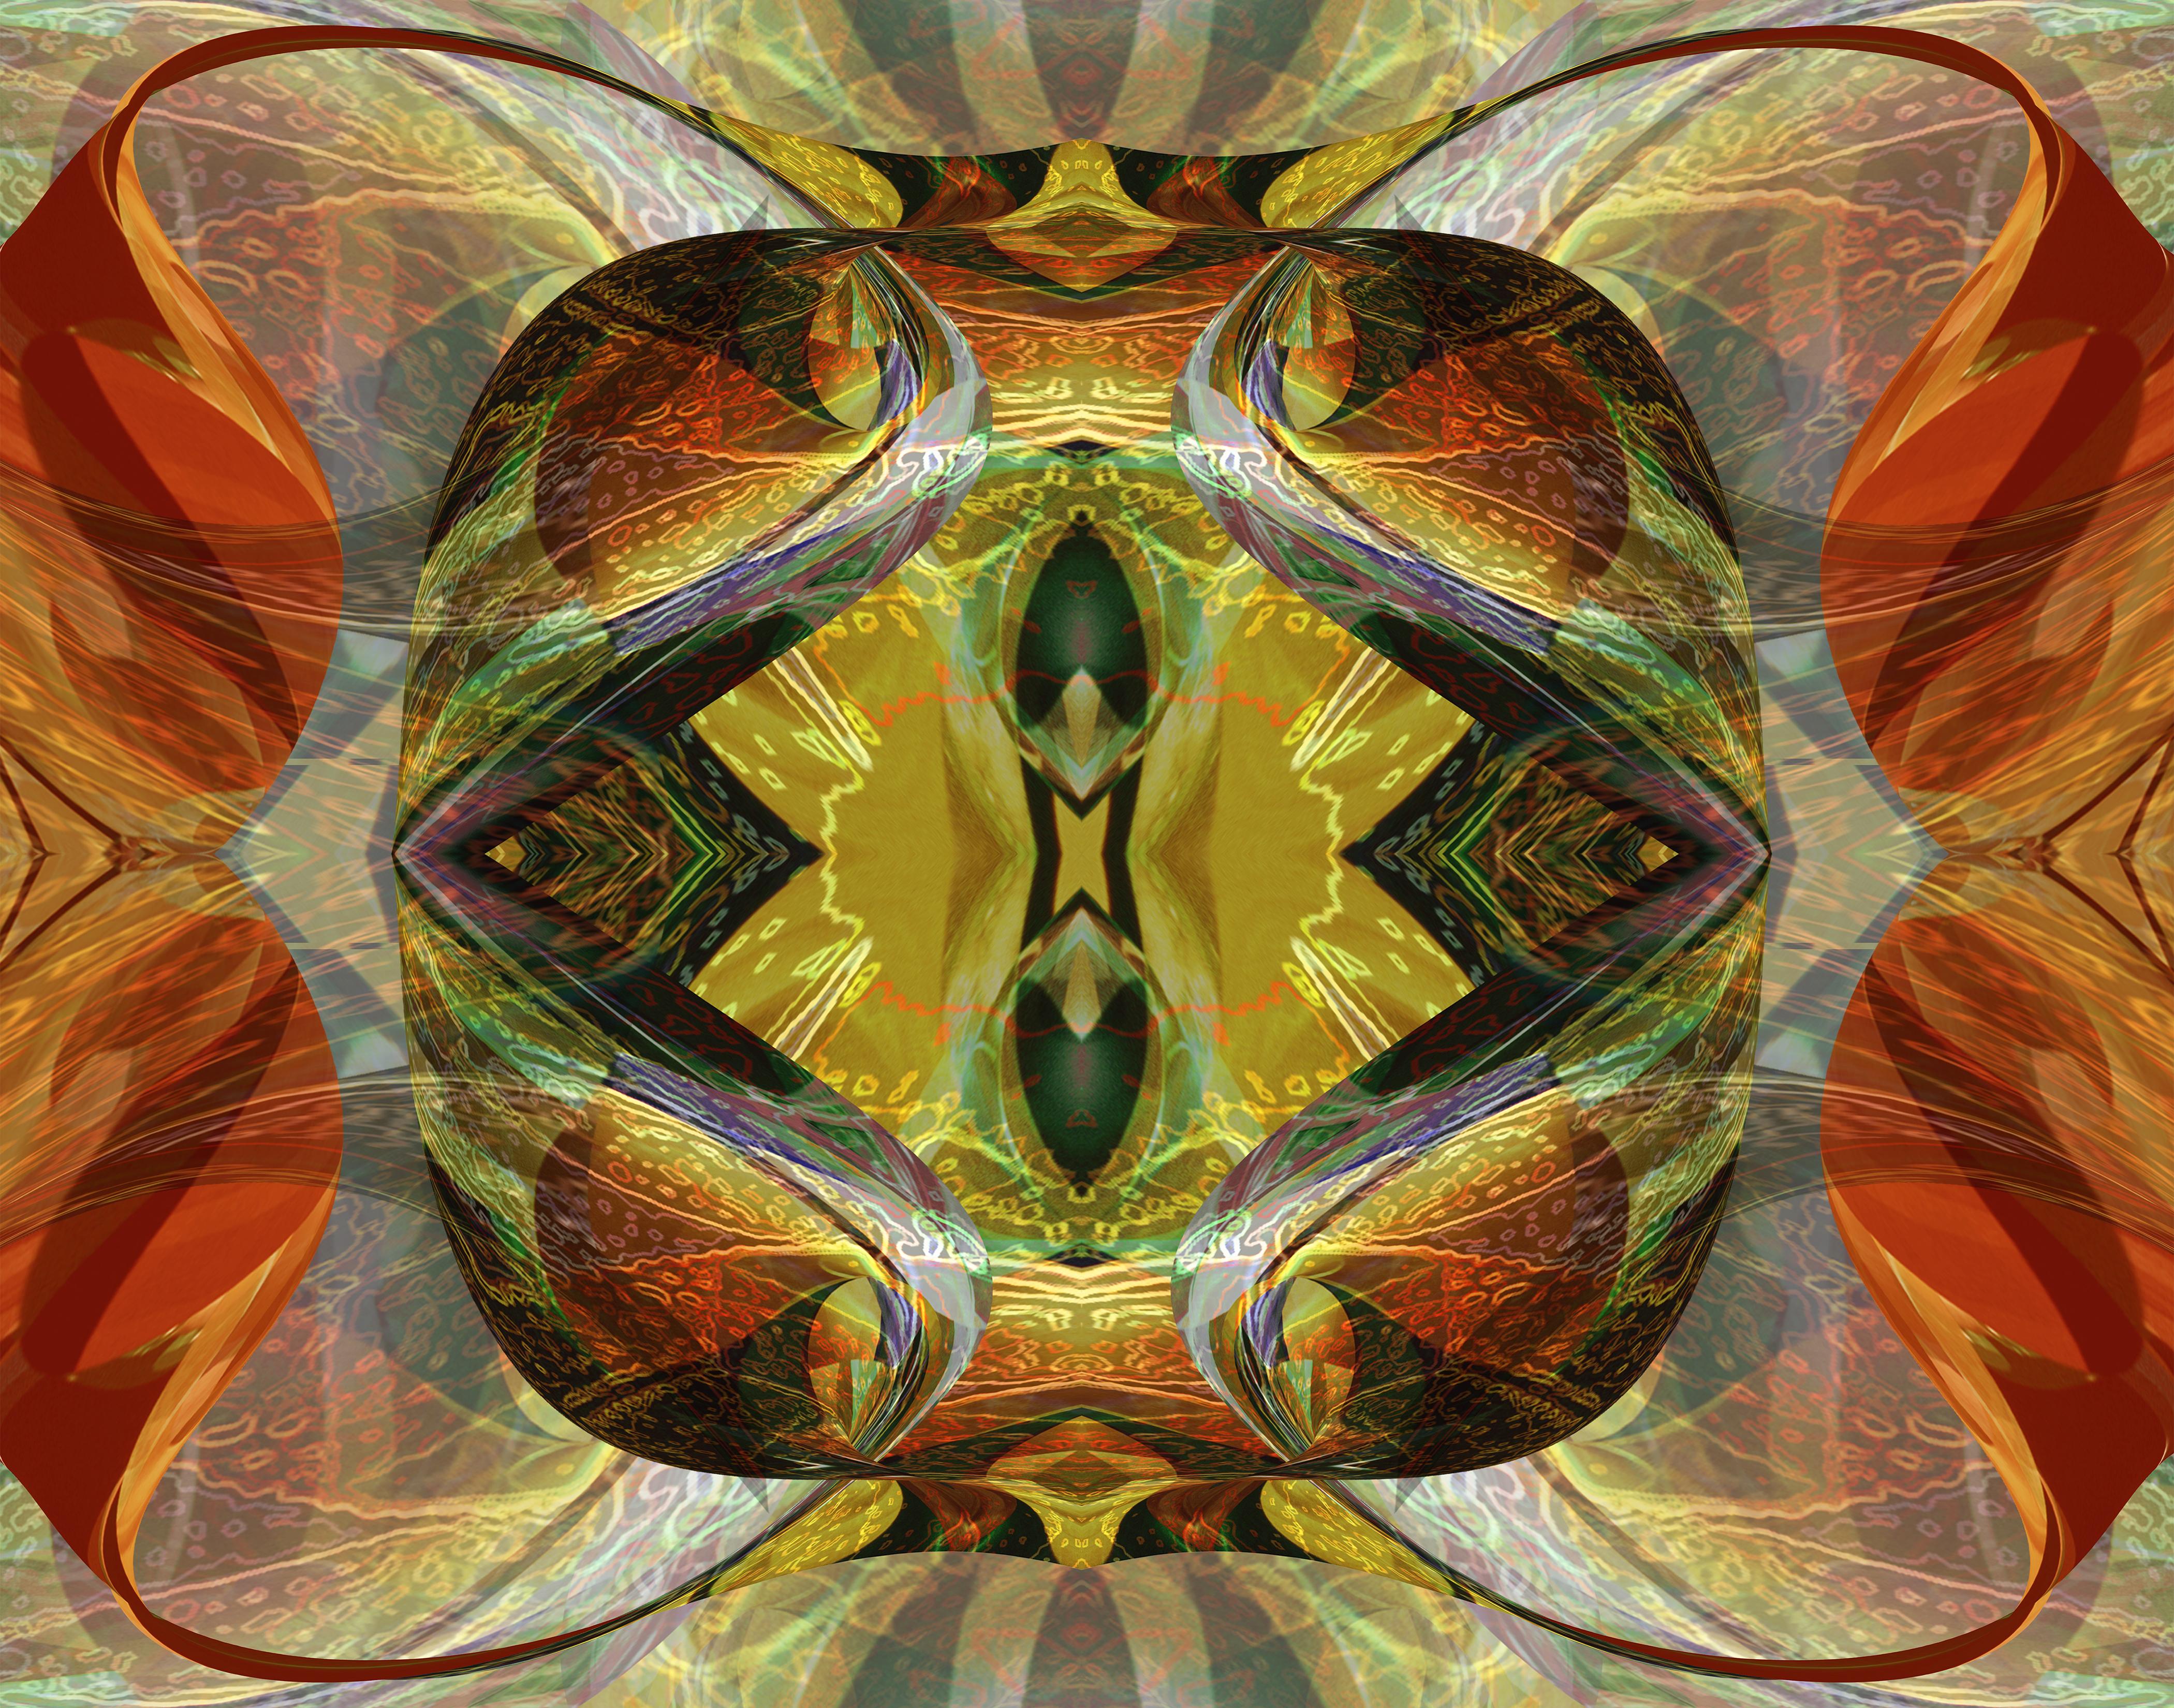 Patricia Search Abstract Print - Geometric Abstract Digital Print, "DreamScape"